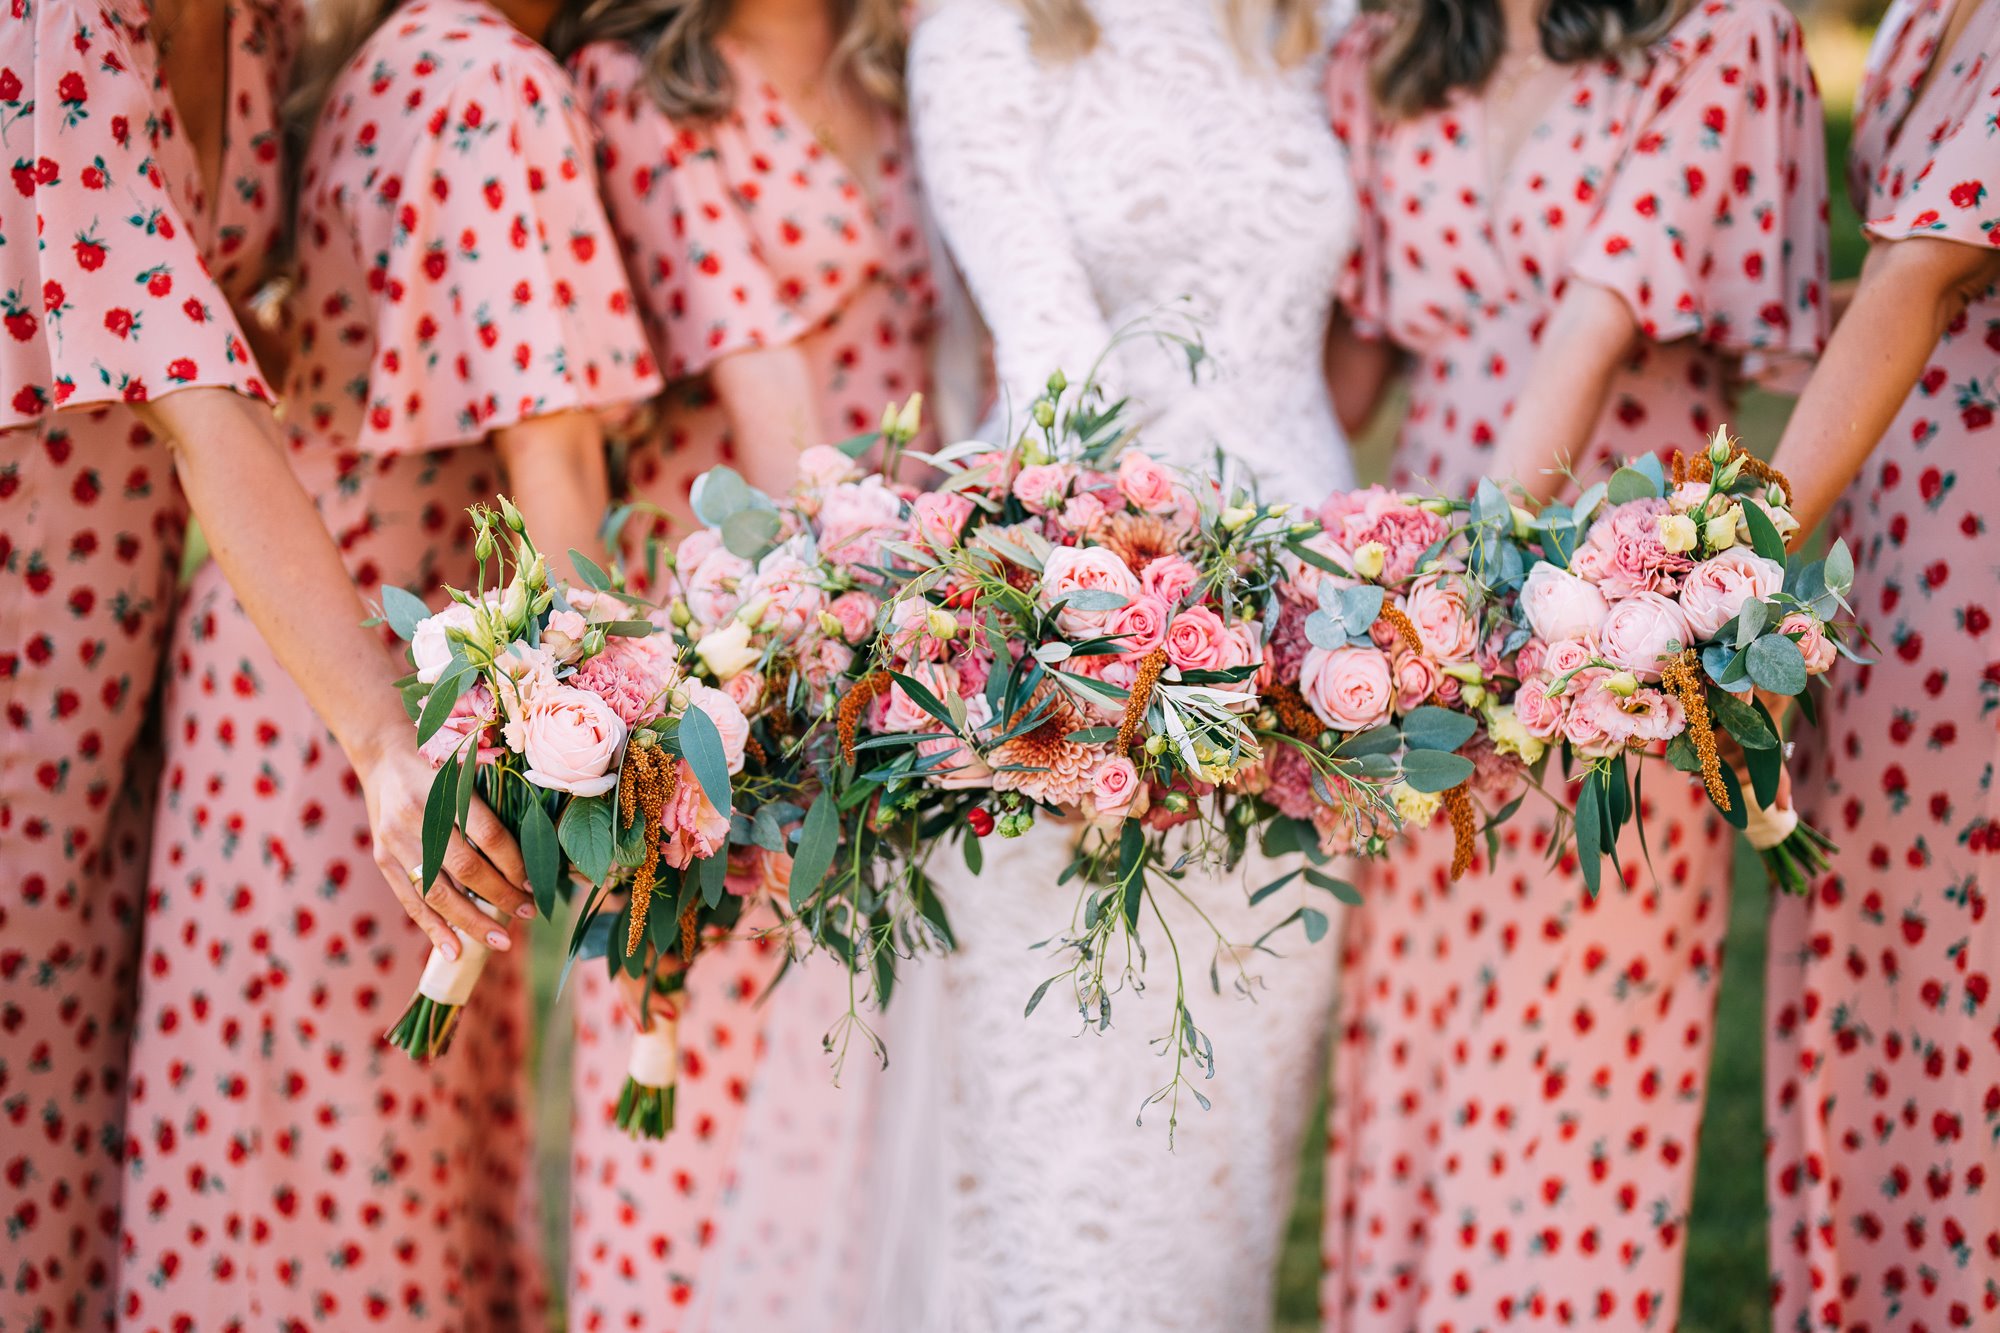 Bridesmaids wearing pink dresses with strawberry pattern holding pink bouquets to the camera at a cool wedding